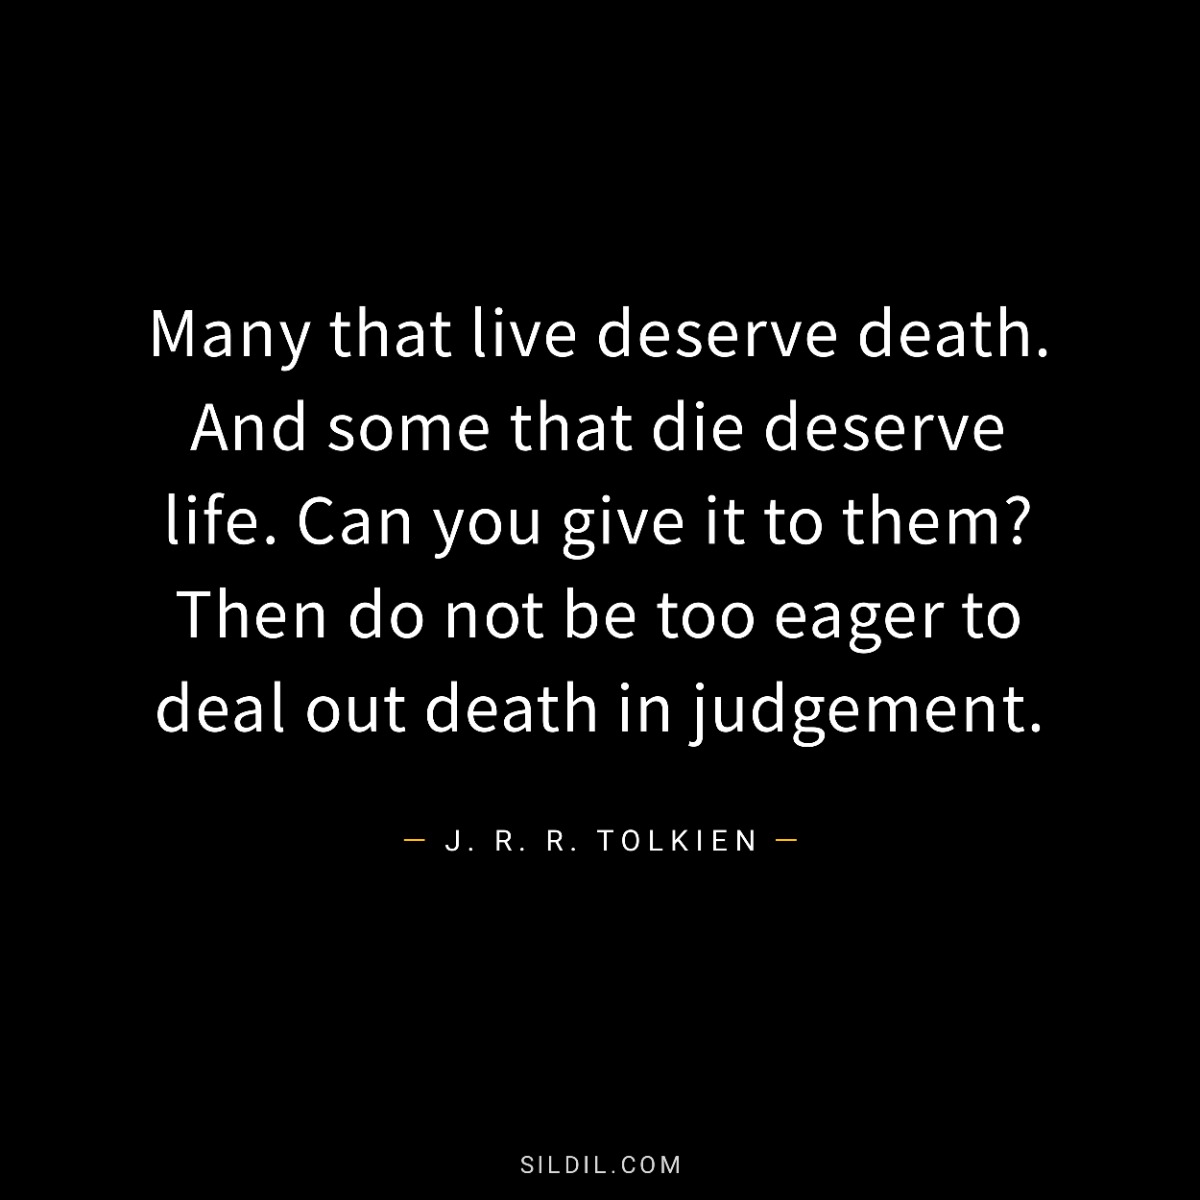 Many that live deserve death. And some that die deserve life. Can you give it to them? Then do not be too eager to deal out death in judgement.